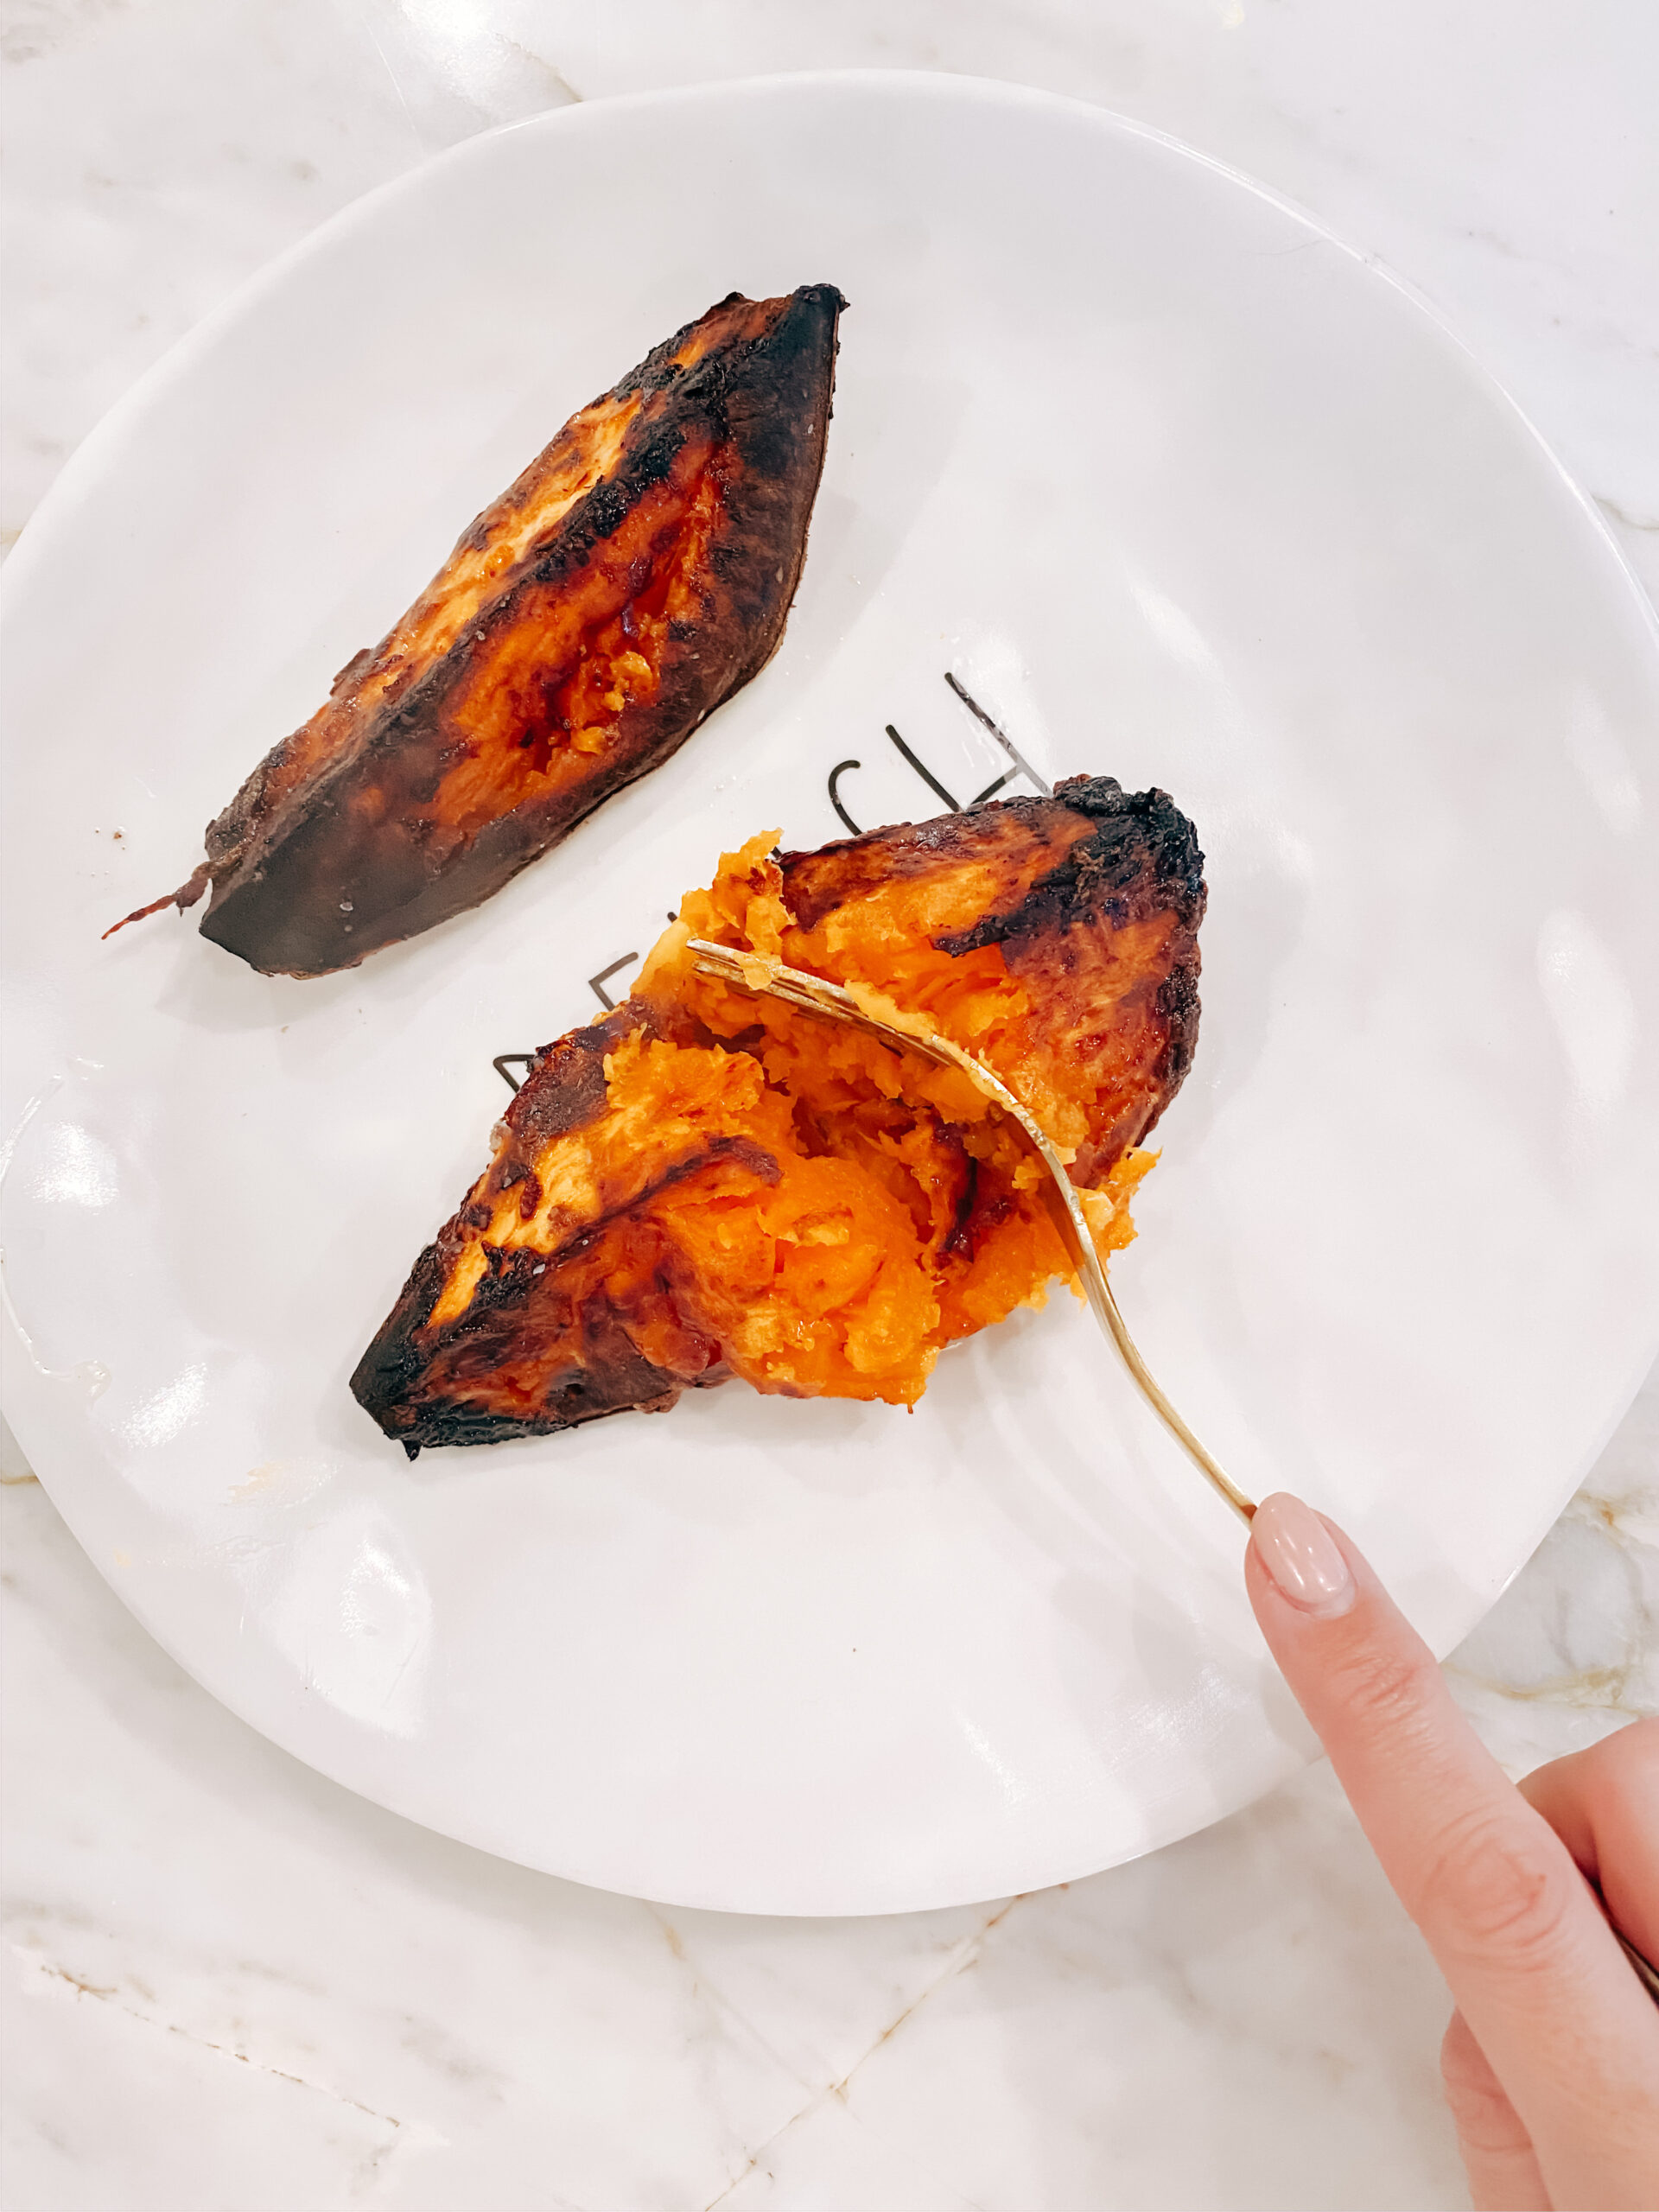 Healthy & Delicious Roasted Sweet Potatoes